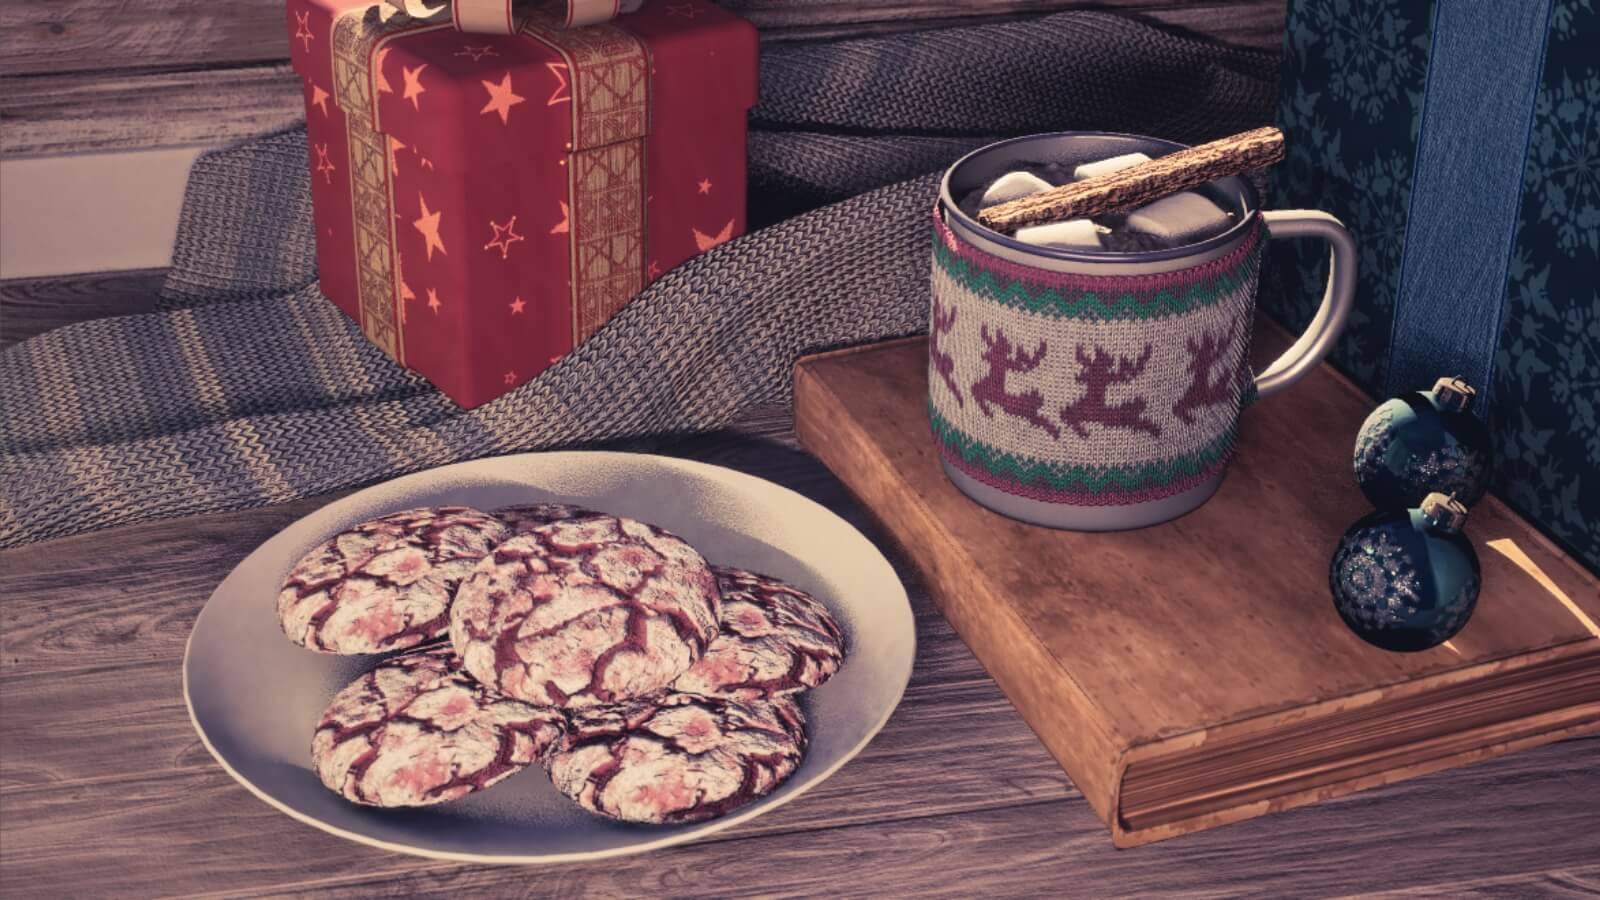 A close up of cookies and a mug of hot cocoa.